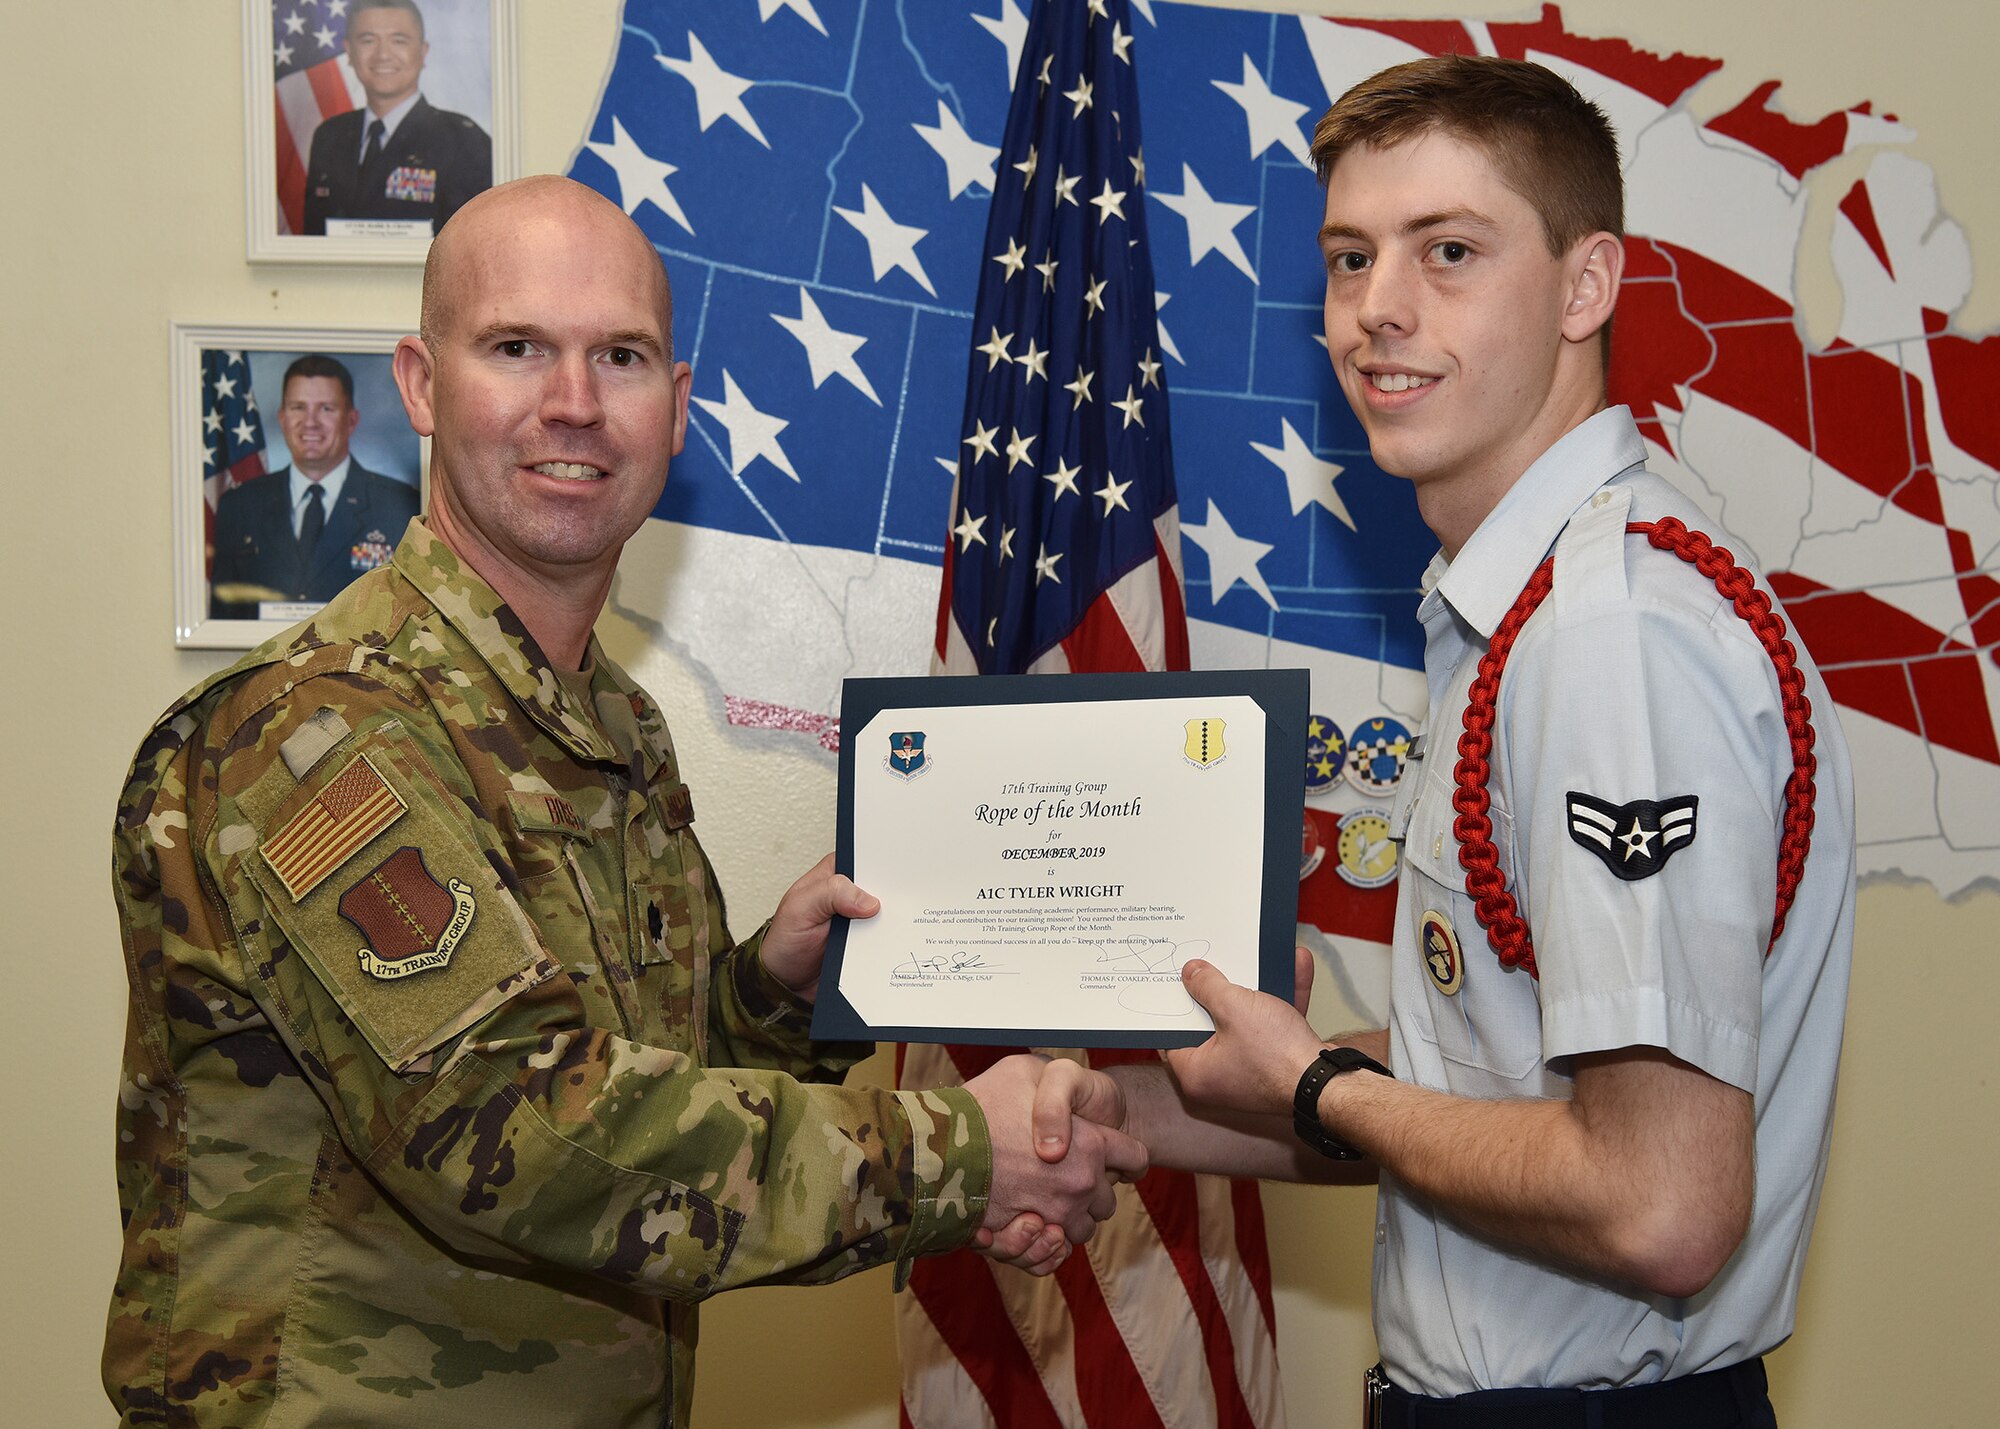 U.S. Air Force Lt. Col. Kevin Boss, 17th Training Group deputy commander, presents the 17th Training Group Rope of the Month award to Airman 1st Class Tyler Wright, 315th Training Squadron student, at Brandenburg Hall on Goodfellow Air Force Base, Texas, Jan. 10, 2019. The 315th TRS’s vision is to develop combat-ready intelligence, surveillance and reconnaissance professionals and promote an innovative squadron culture and identity unmatched across the U.S. Air Force. (U.S. Air Force photo by Staff Sgt. Chad Warren)